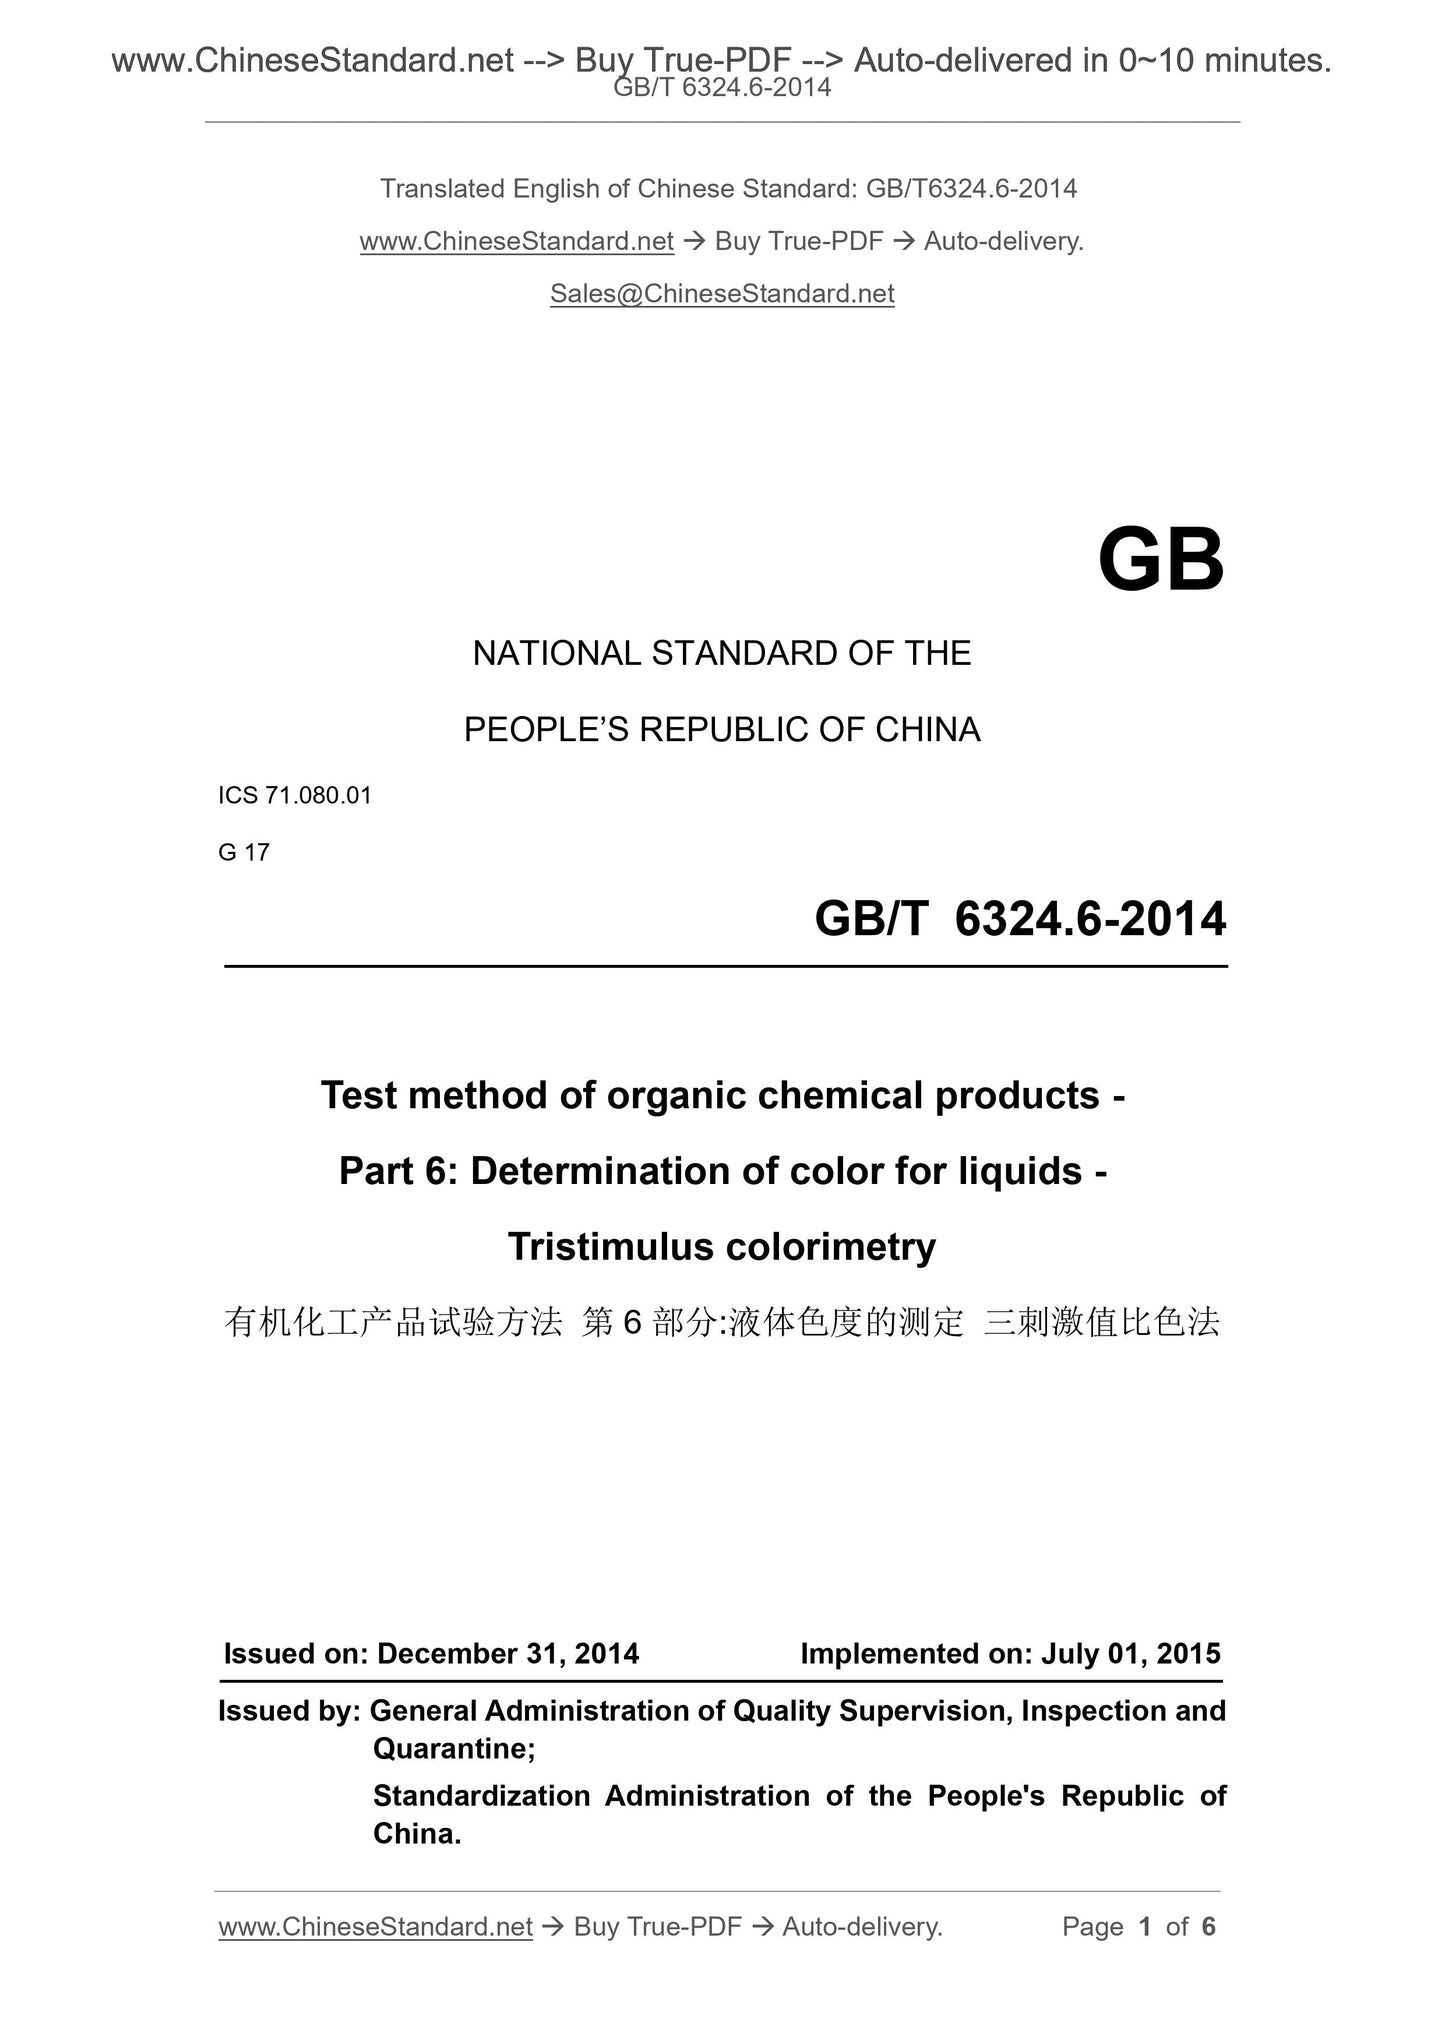 GB/T 6324.6-2014 Page 1